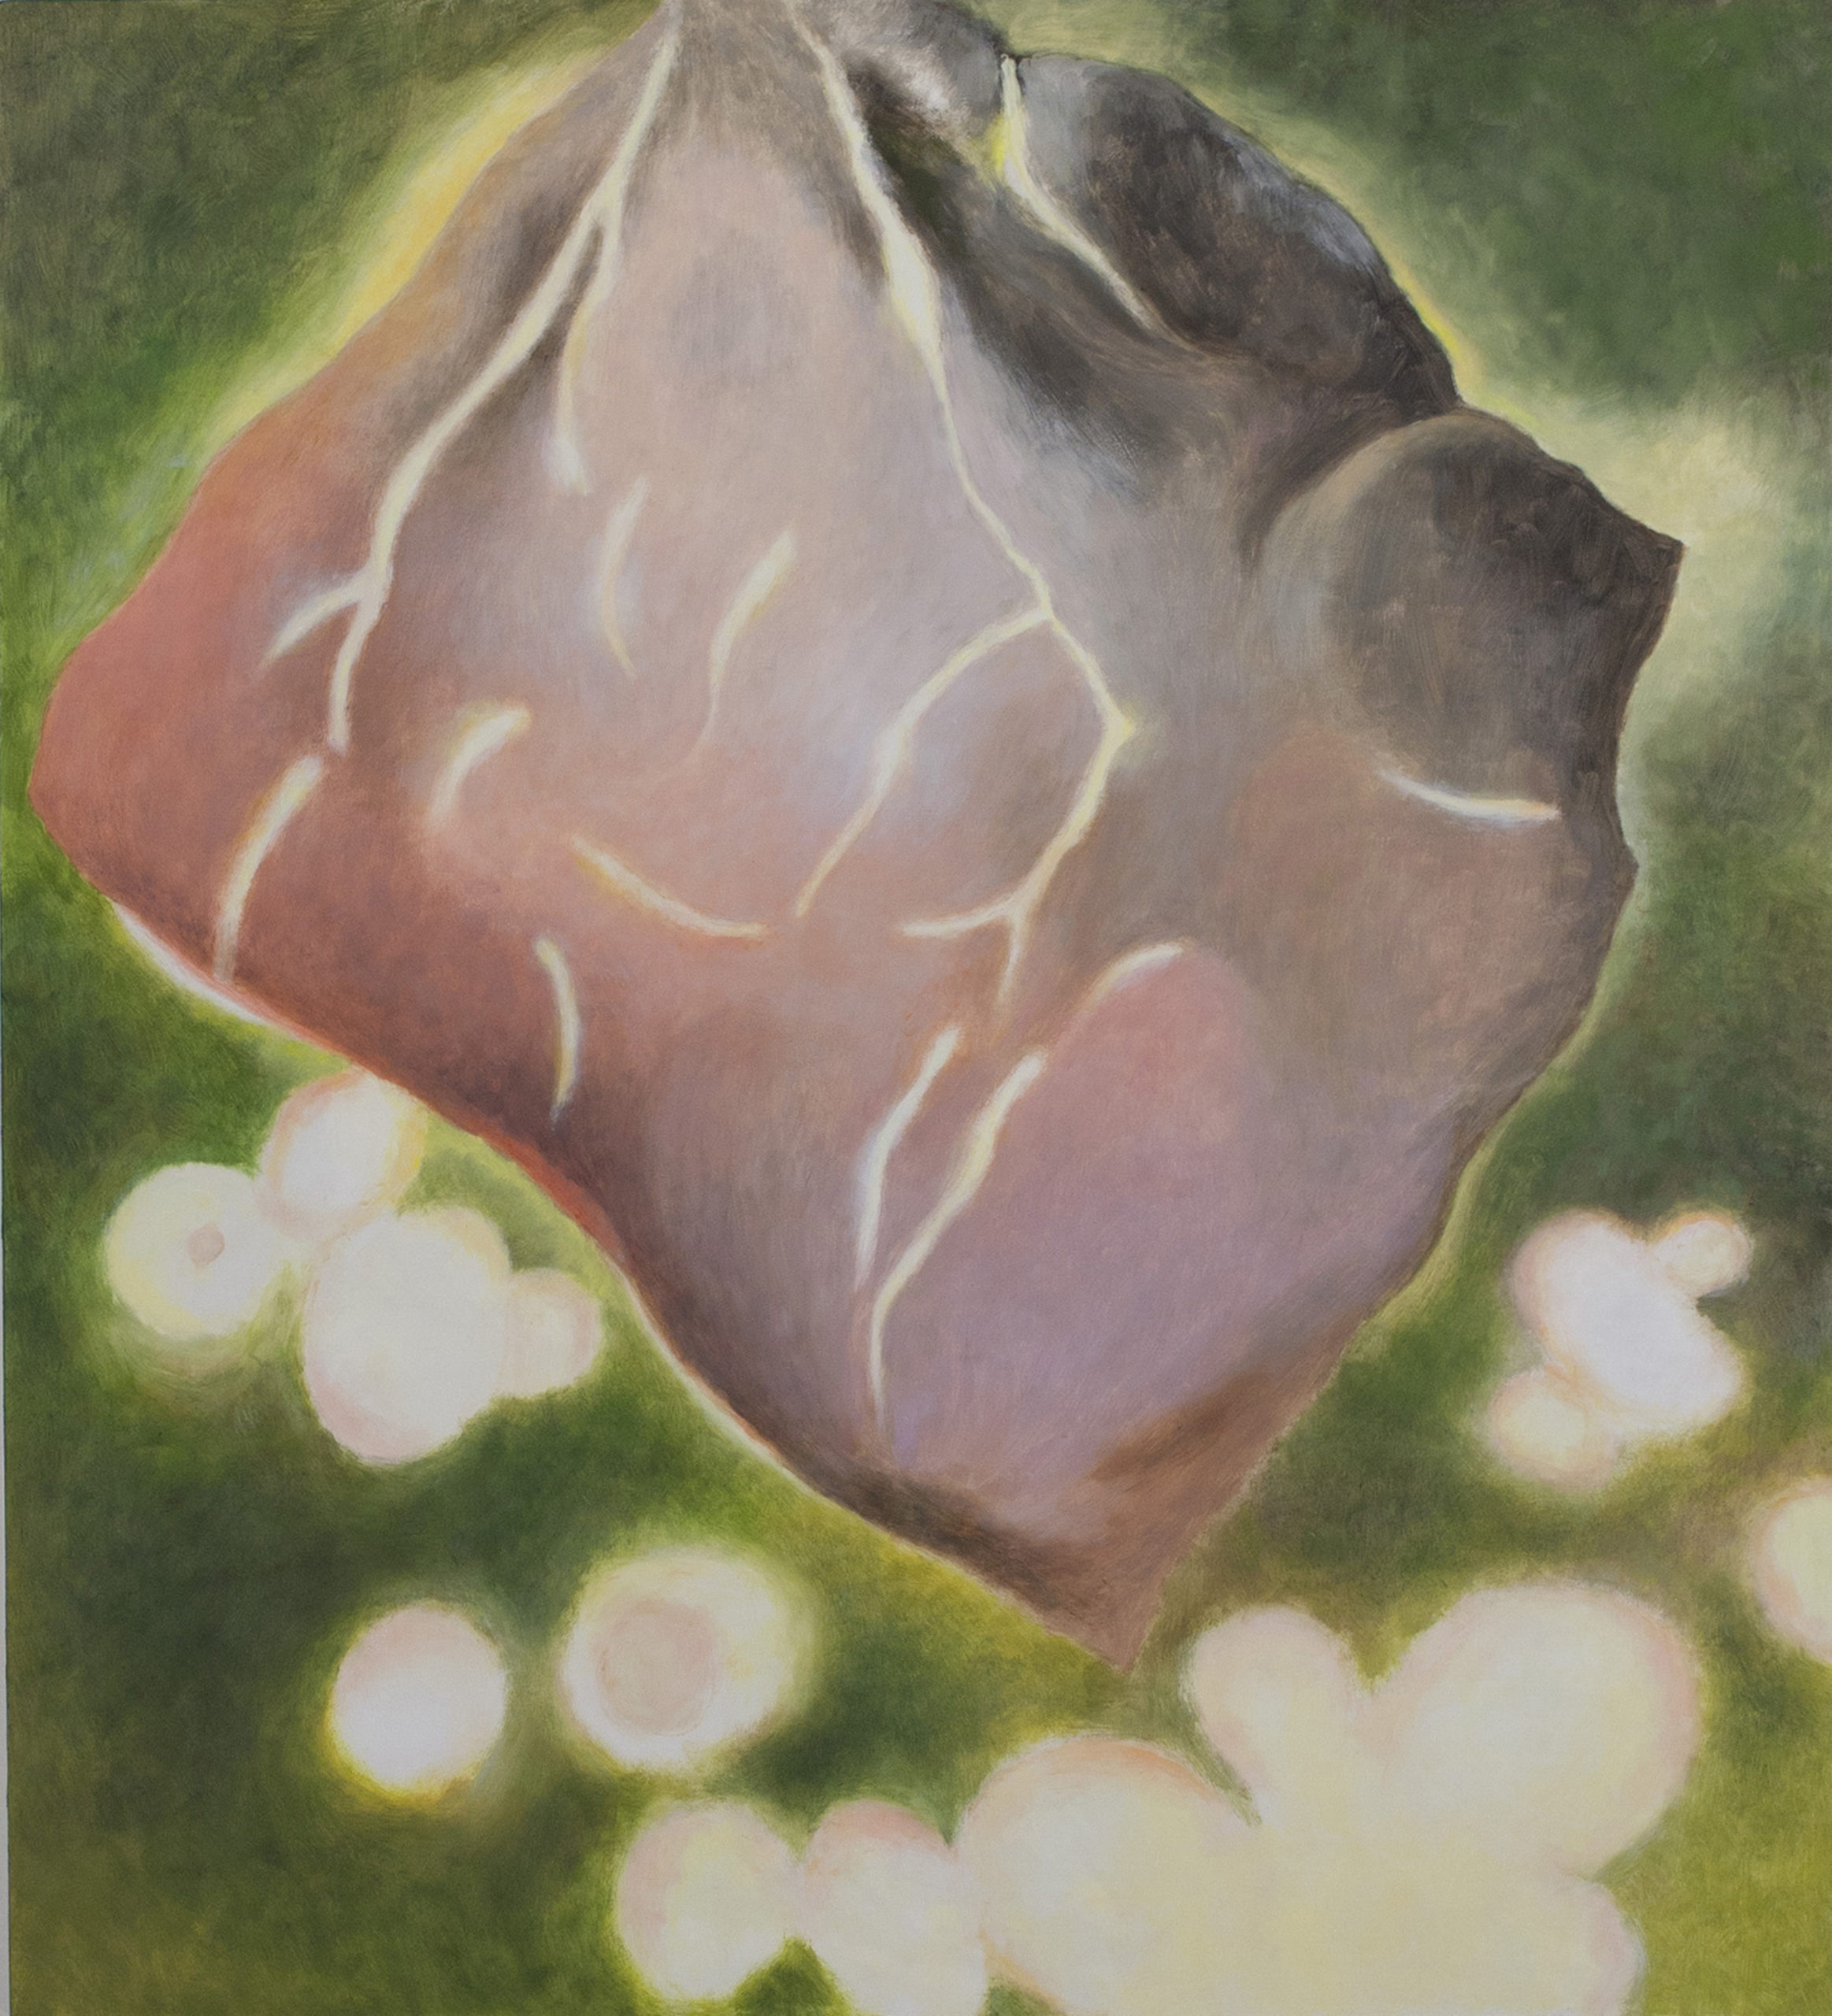 
		                					Shirley Crow		                																	
																											<i>Living Energy,</i>  
																																								2010, 
																																								oil on panel, 
																																								42 x 38 x 2 1/2 inches 
																								
		                				